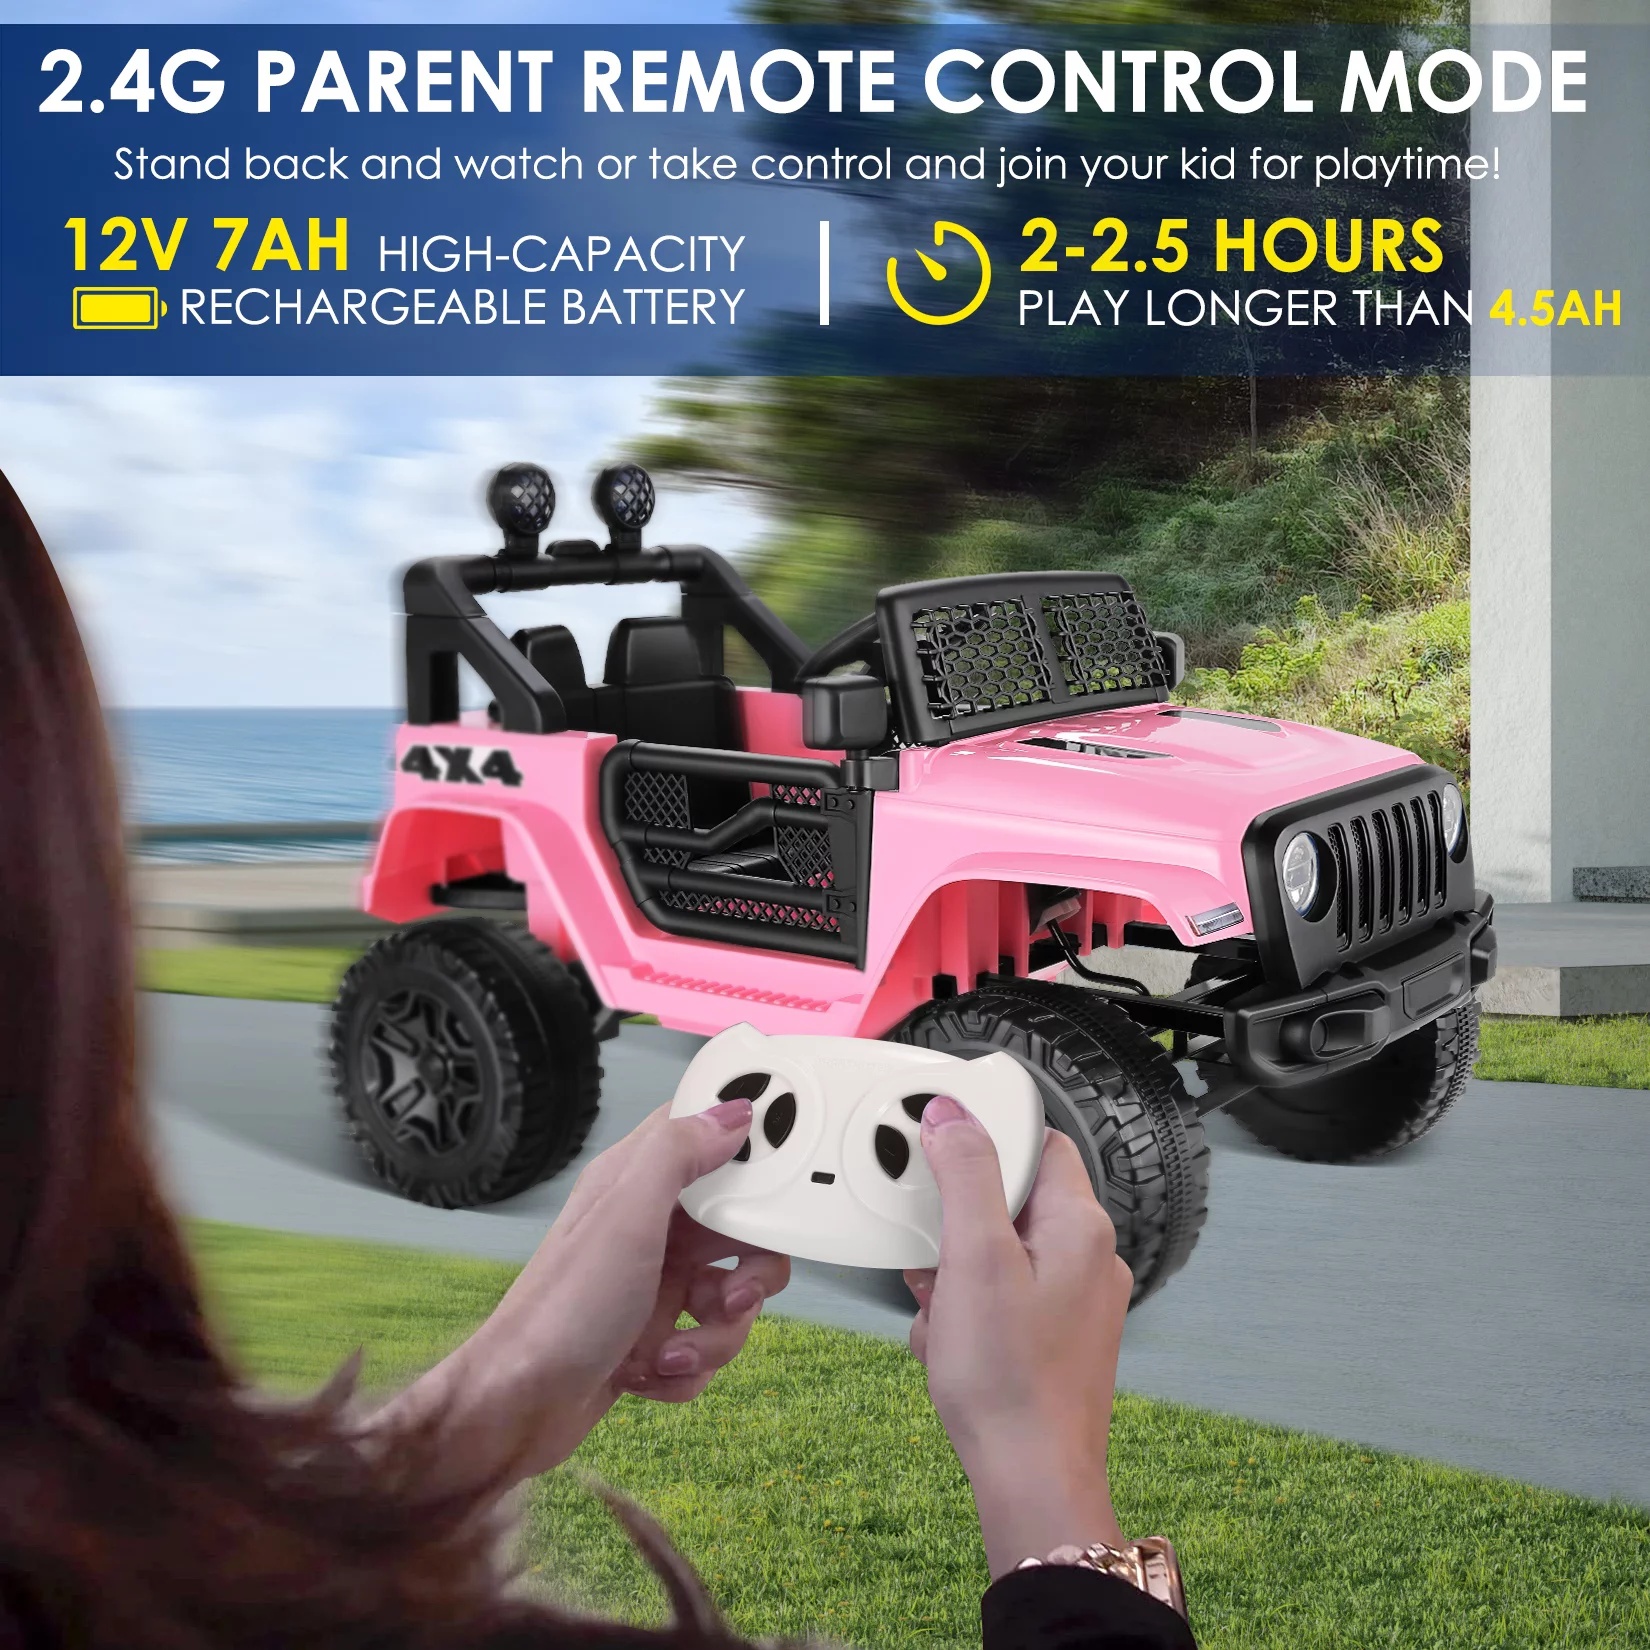 Funcid 12V 7AH Kids Powered Ride on Truck Car with Parent Remote Control, Bluetooth Music, Spring Suspension, LED Lights - Pink - image 4 of 11